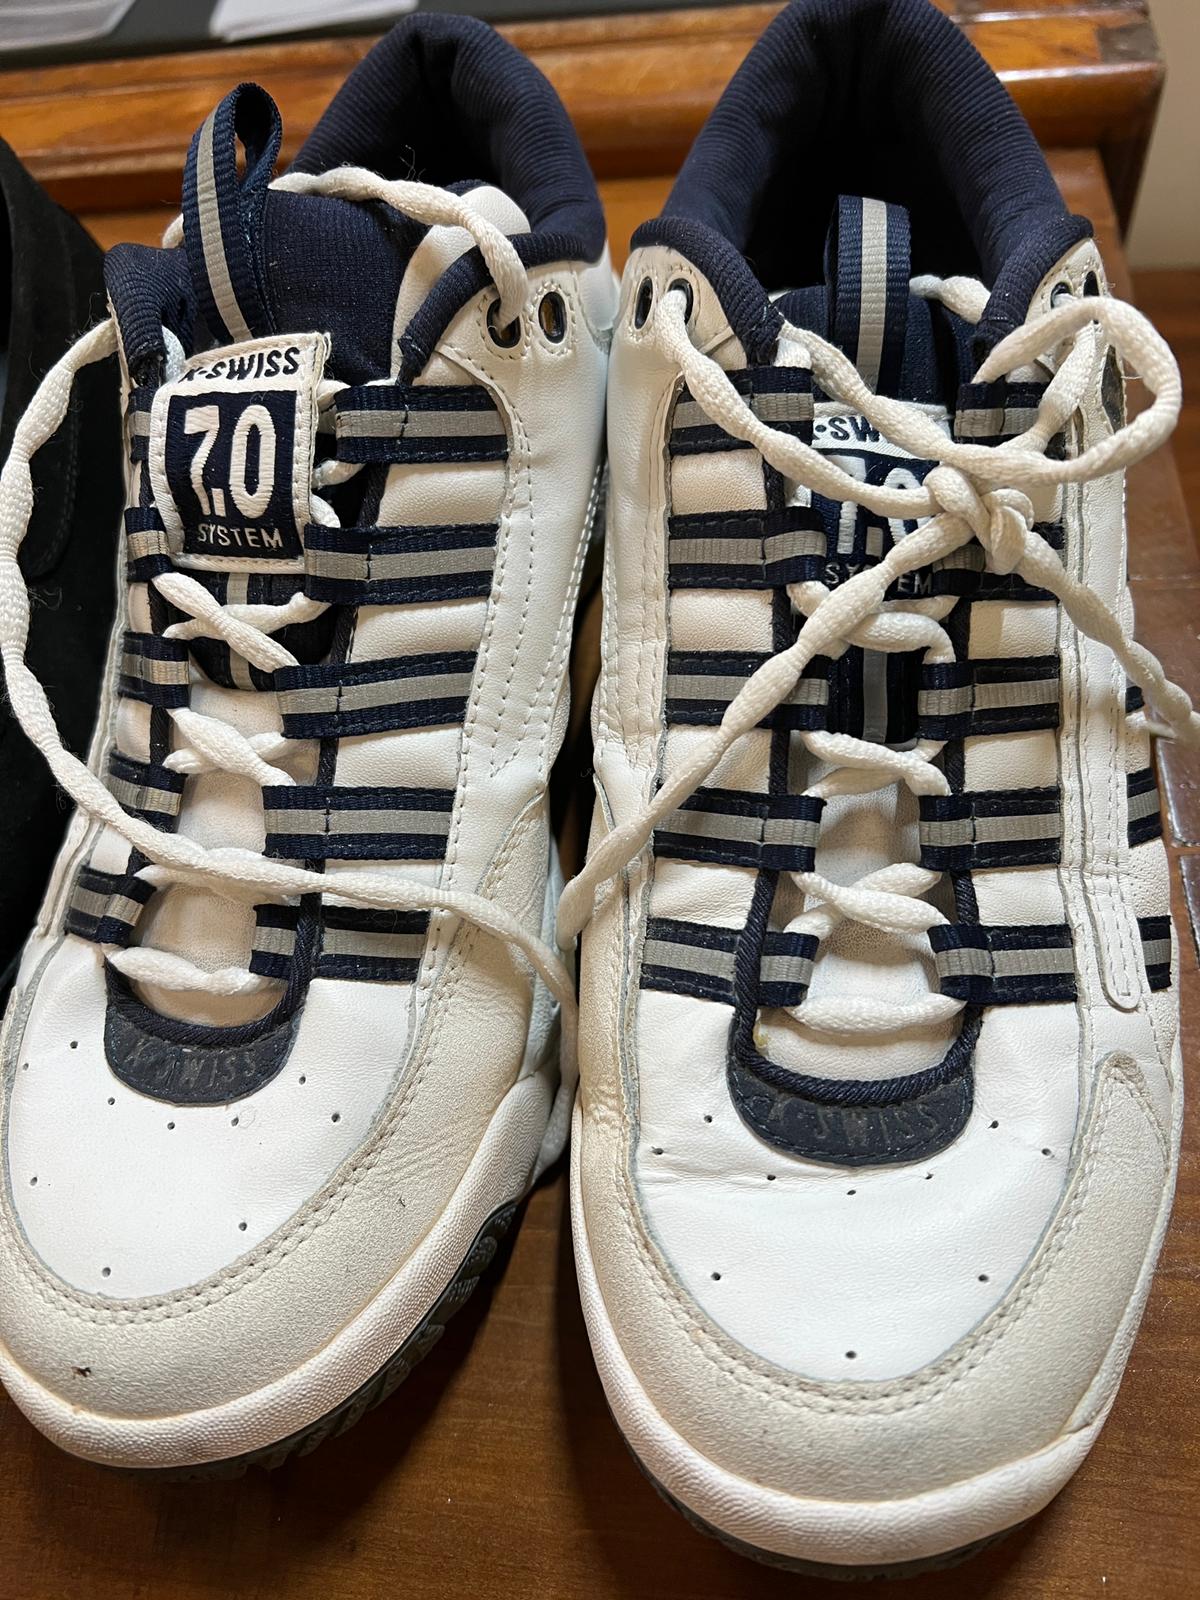 Two Todd sued shoes and one K-Swiss 7.0 system trainers all size 9 - Image 3 of 7